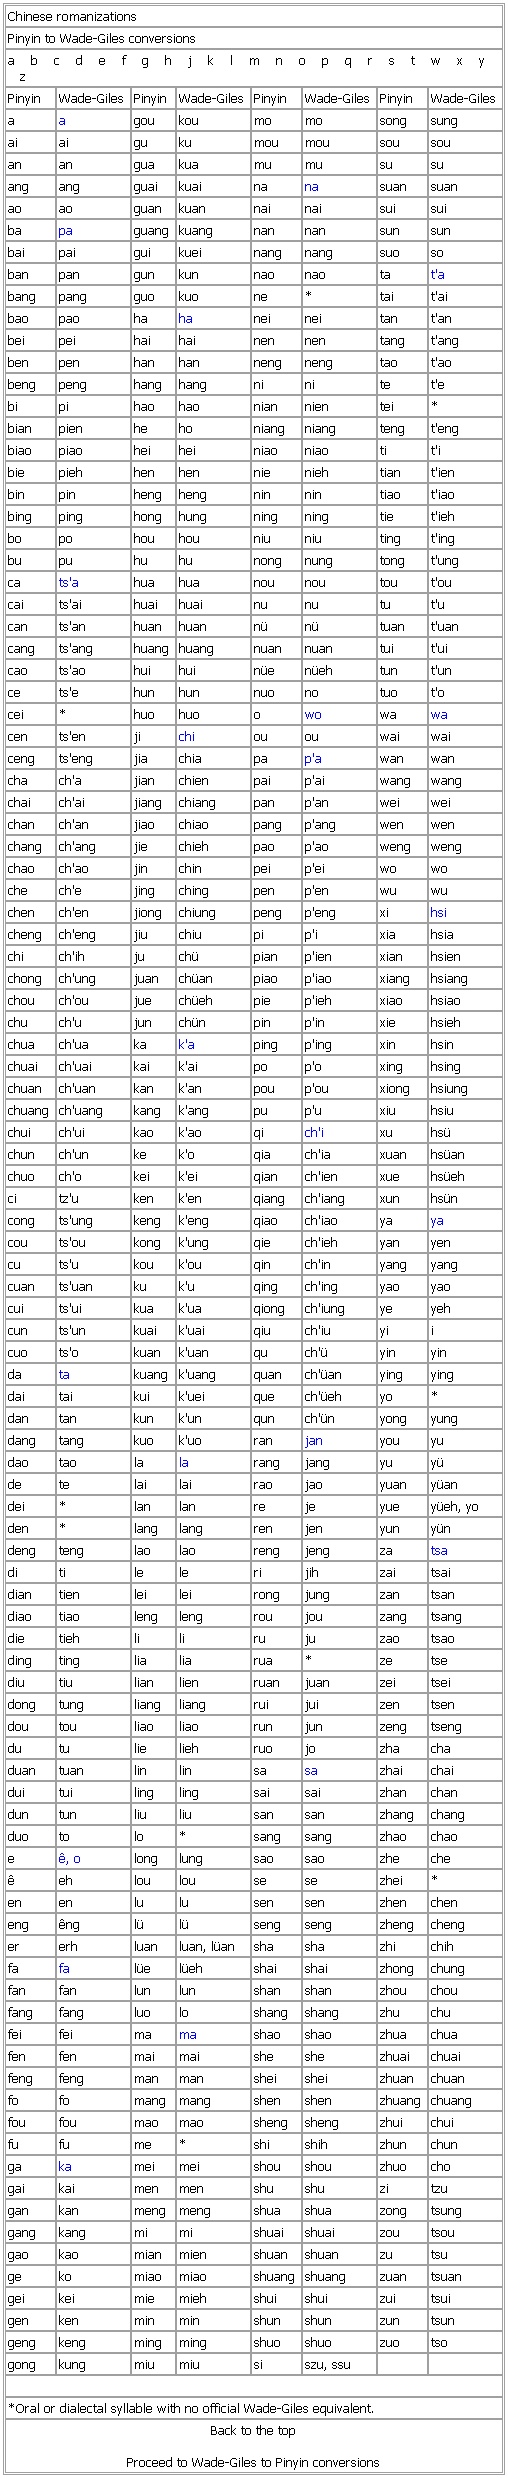 Chinese romanizations: Pinyin to Wade-Giles conversions